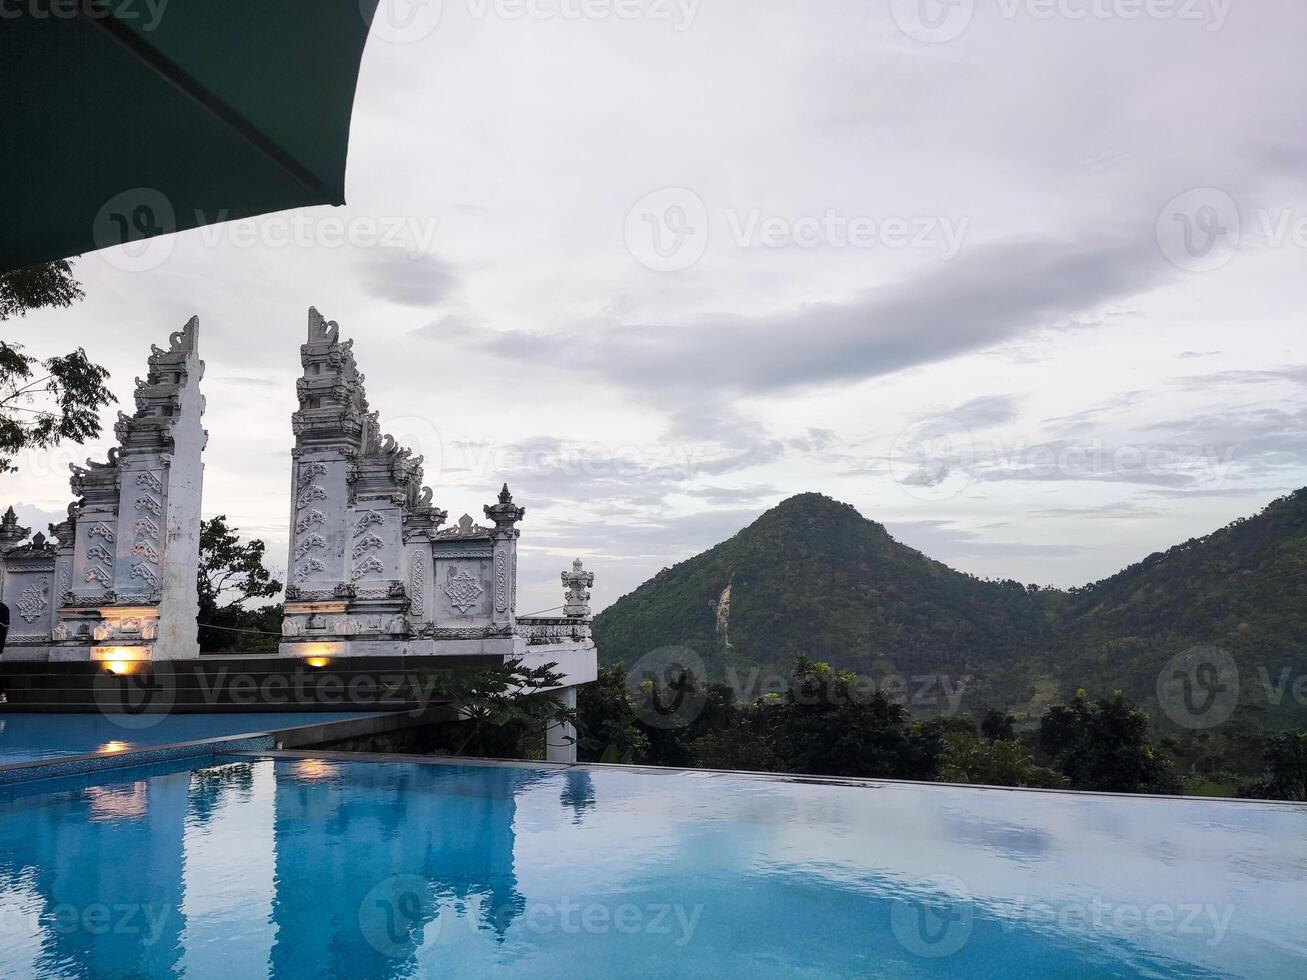 a swimming pool with a clear blue water. In the background, there is a traditional Balinese temple with multiple tiers. There are palm trees and other lush vegetation surrounding the pool and temple. photo